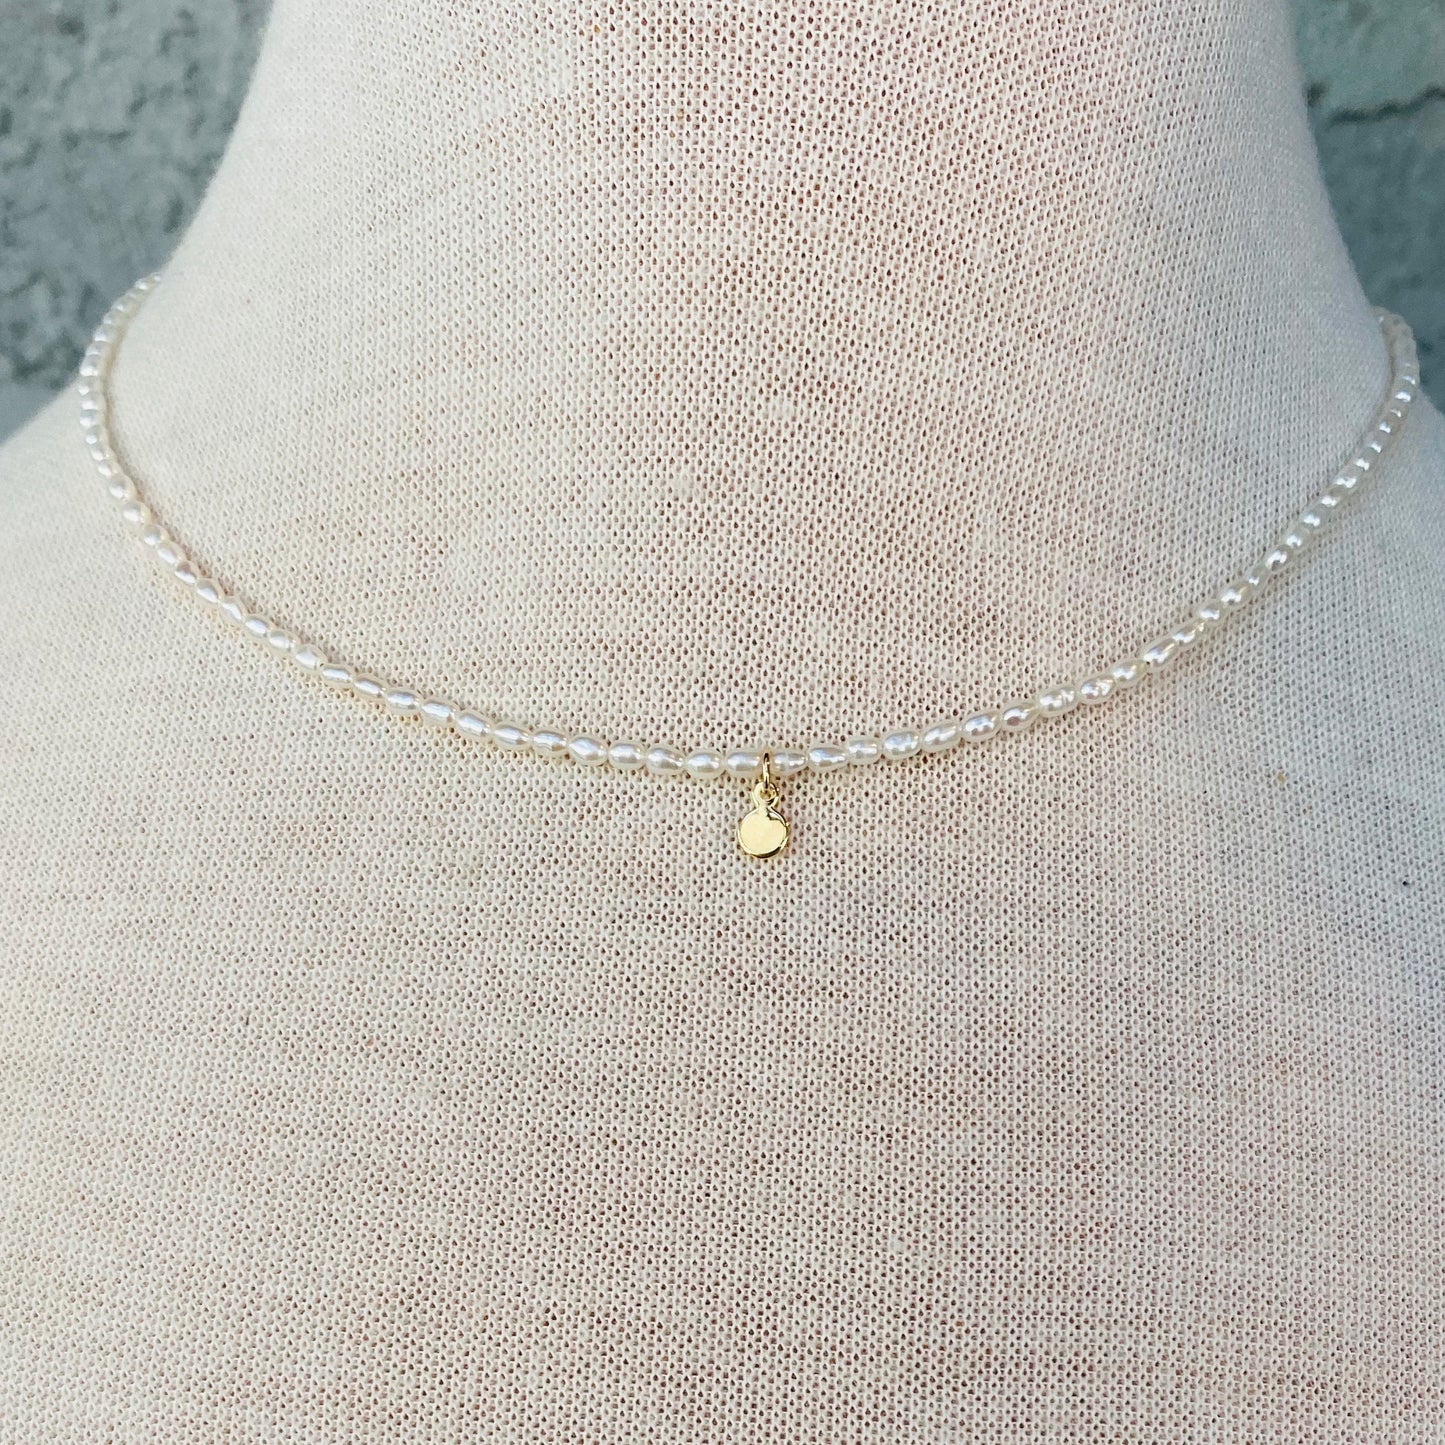 Tiny Rice Pearl Necklace